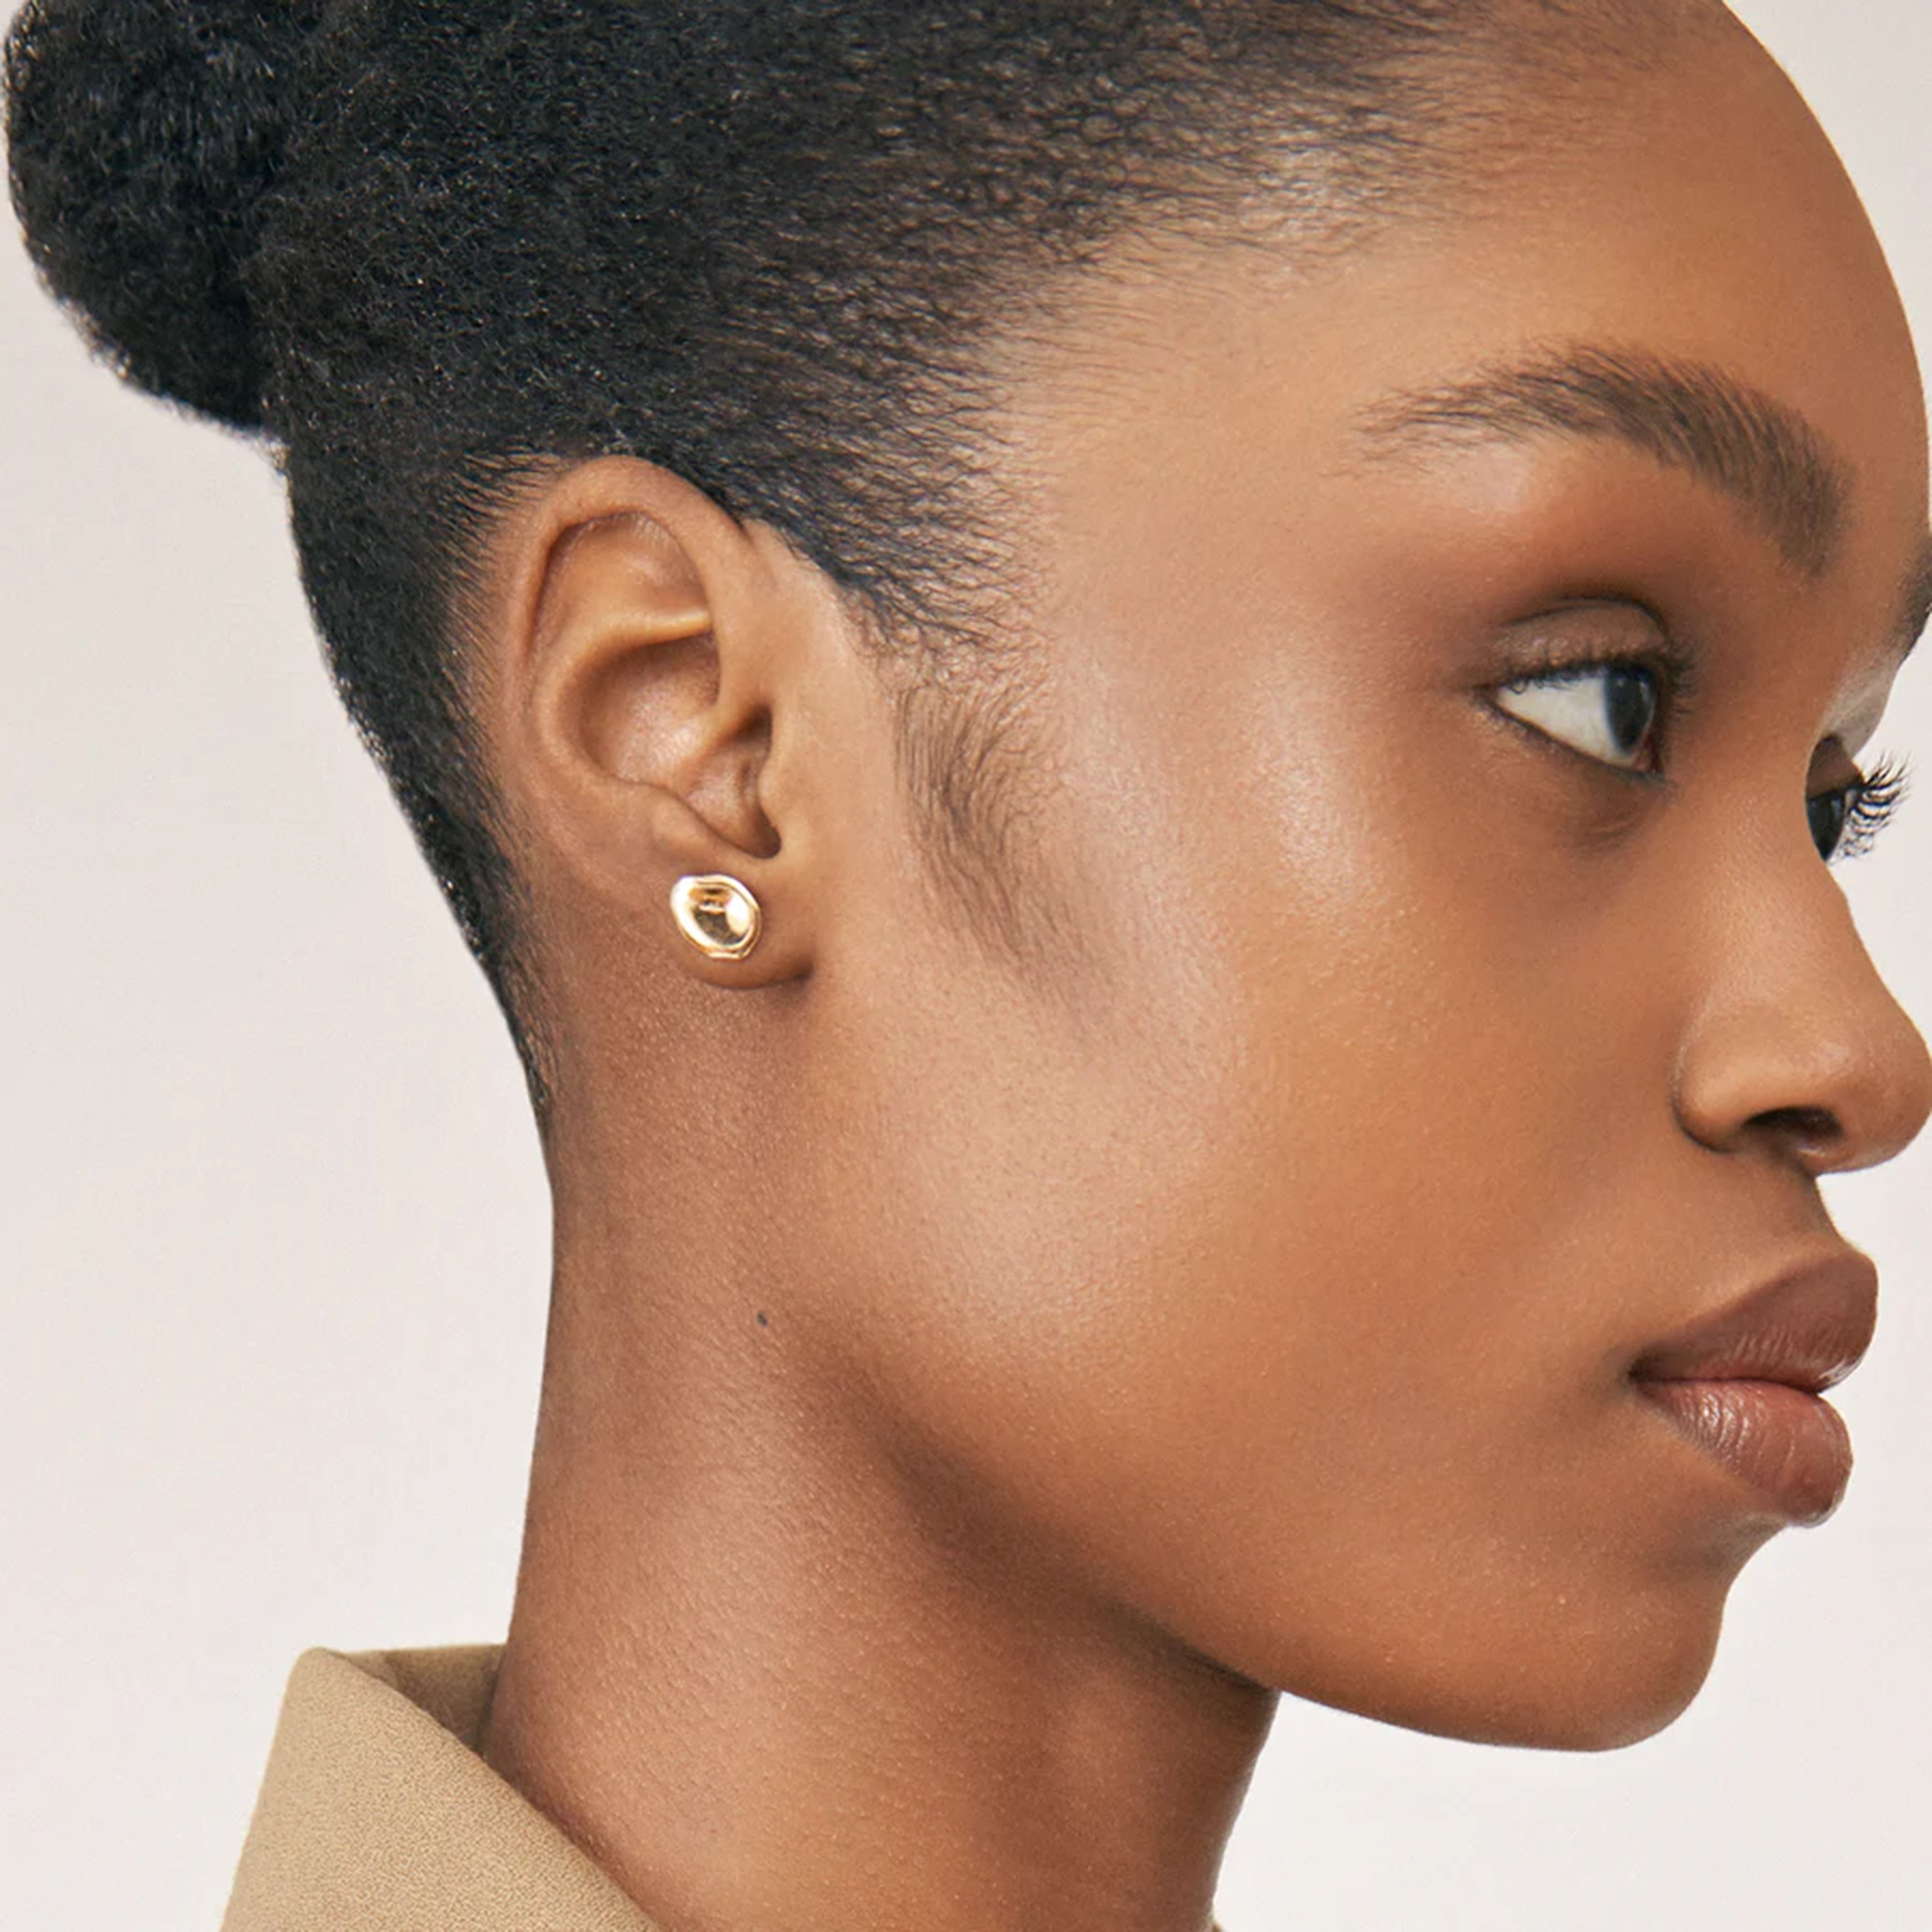 Earrings for Stretched Lobes: How to Rescue (Or Hide) Droopy